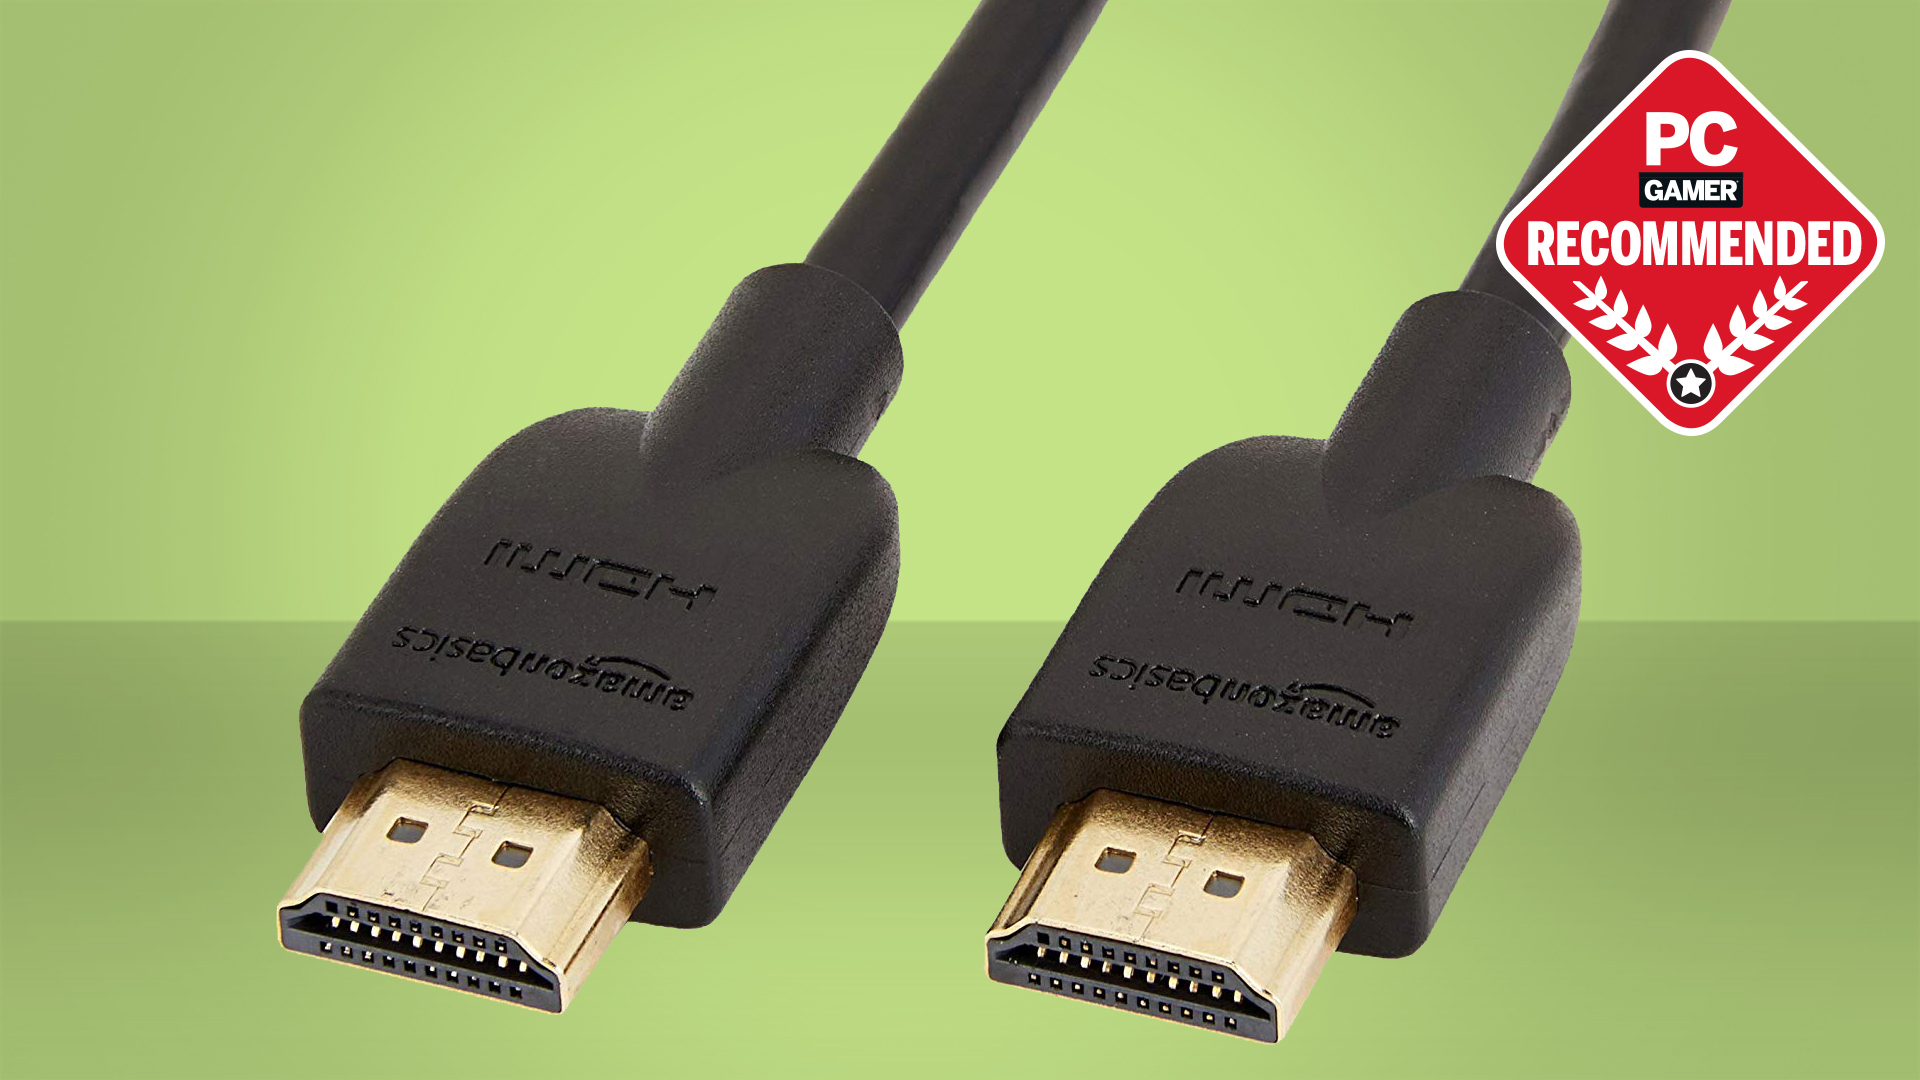 The Best Hdmi Cable For Gaming On Pc In 2019 Pc Gamer